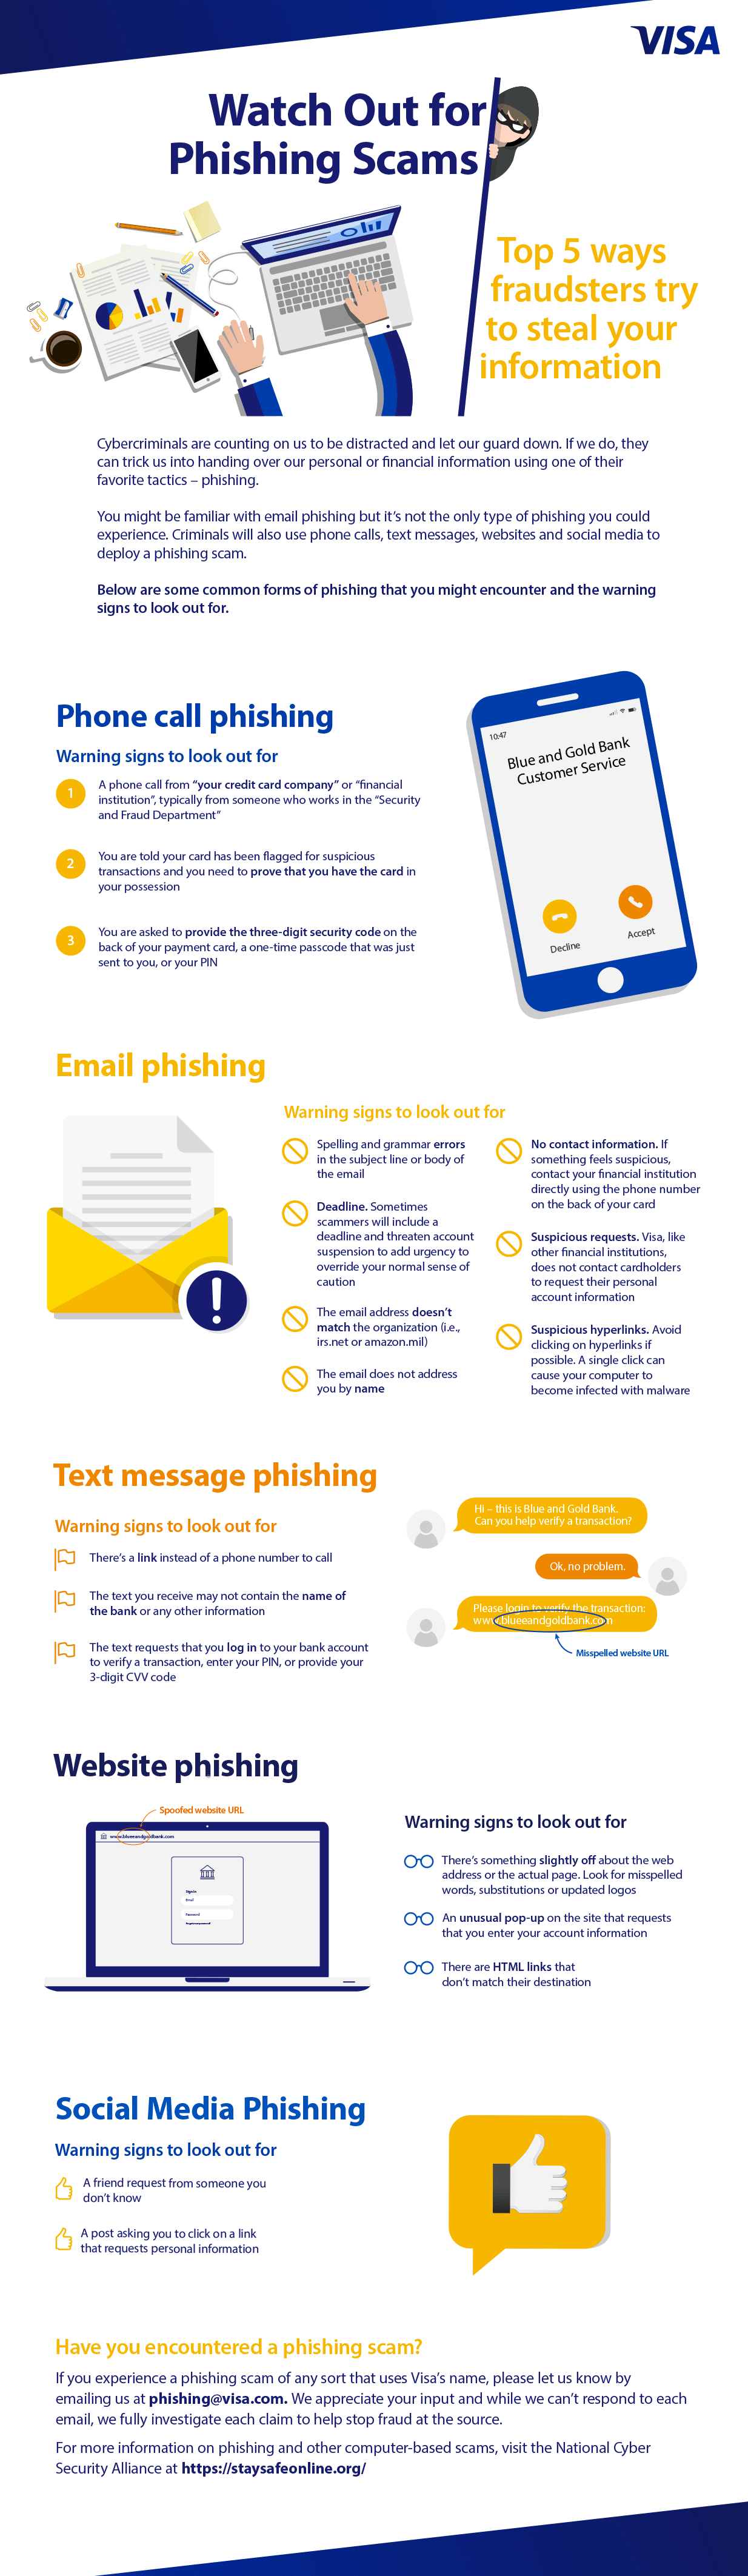 Infographic called Watch out for phishing scams